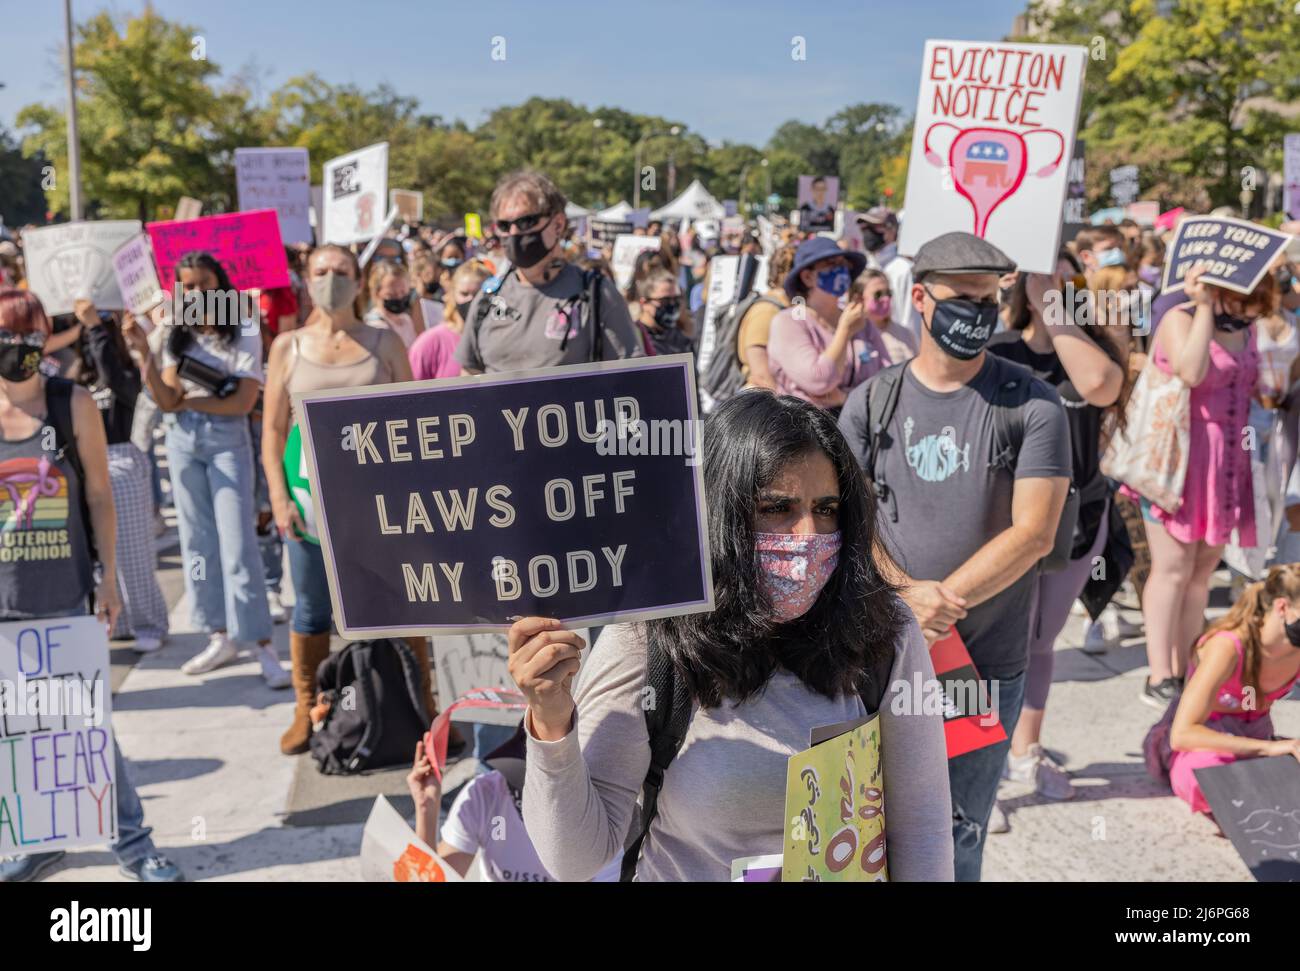 WASHINGTON, D.C. – October 2, 2021: Demonstrators rally in Washington, D.C.’s Freedom Plaza during the 2021 Women’s March. Stock Photo